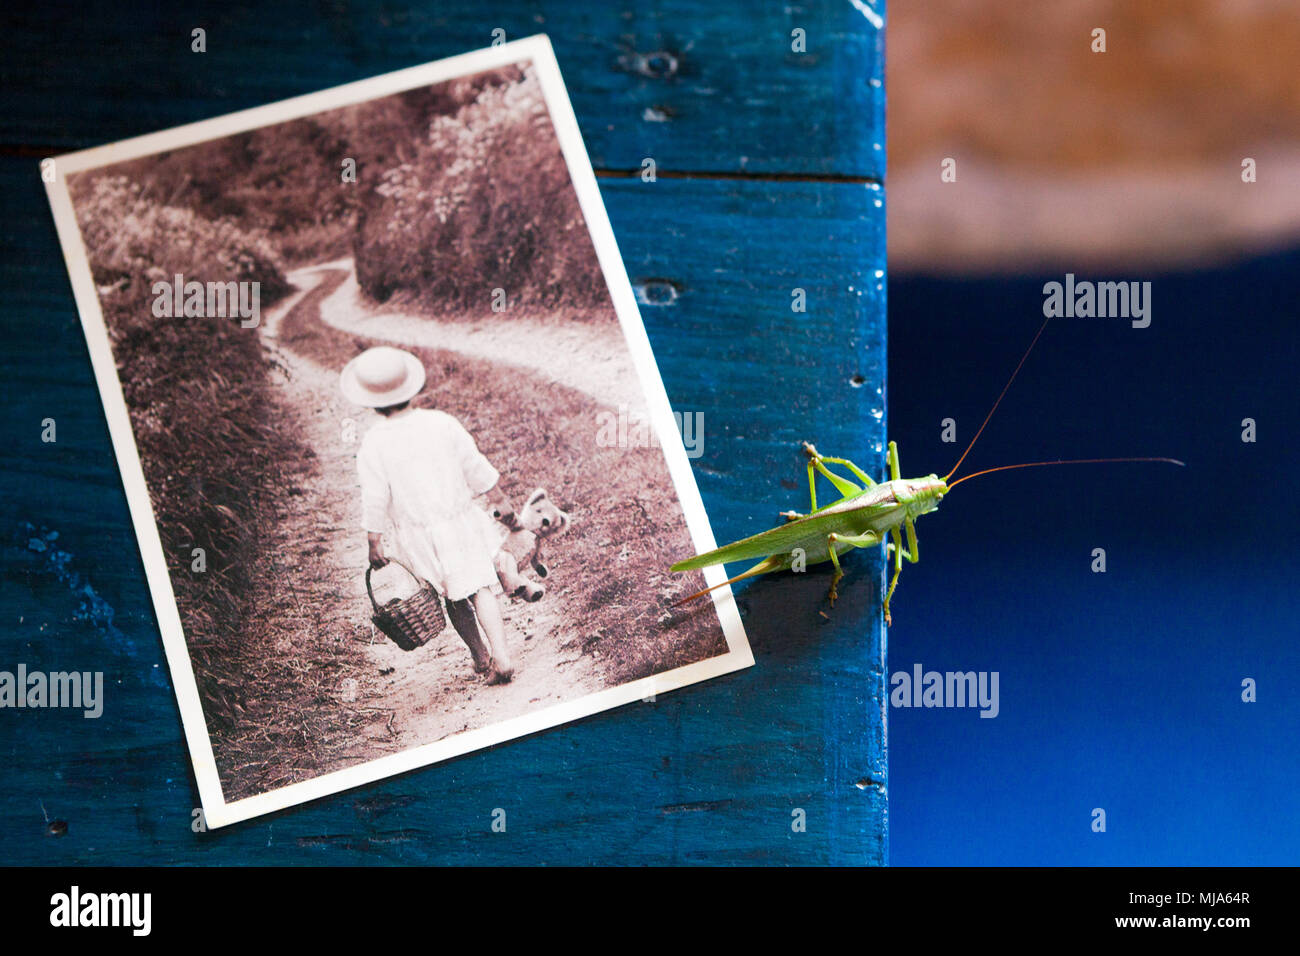 Grasshopper on a blue wooden table next to a postal card of a young girl in white clothes walking on a path with a teddy bear in her hand. Stock Photo